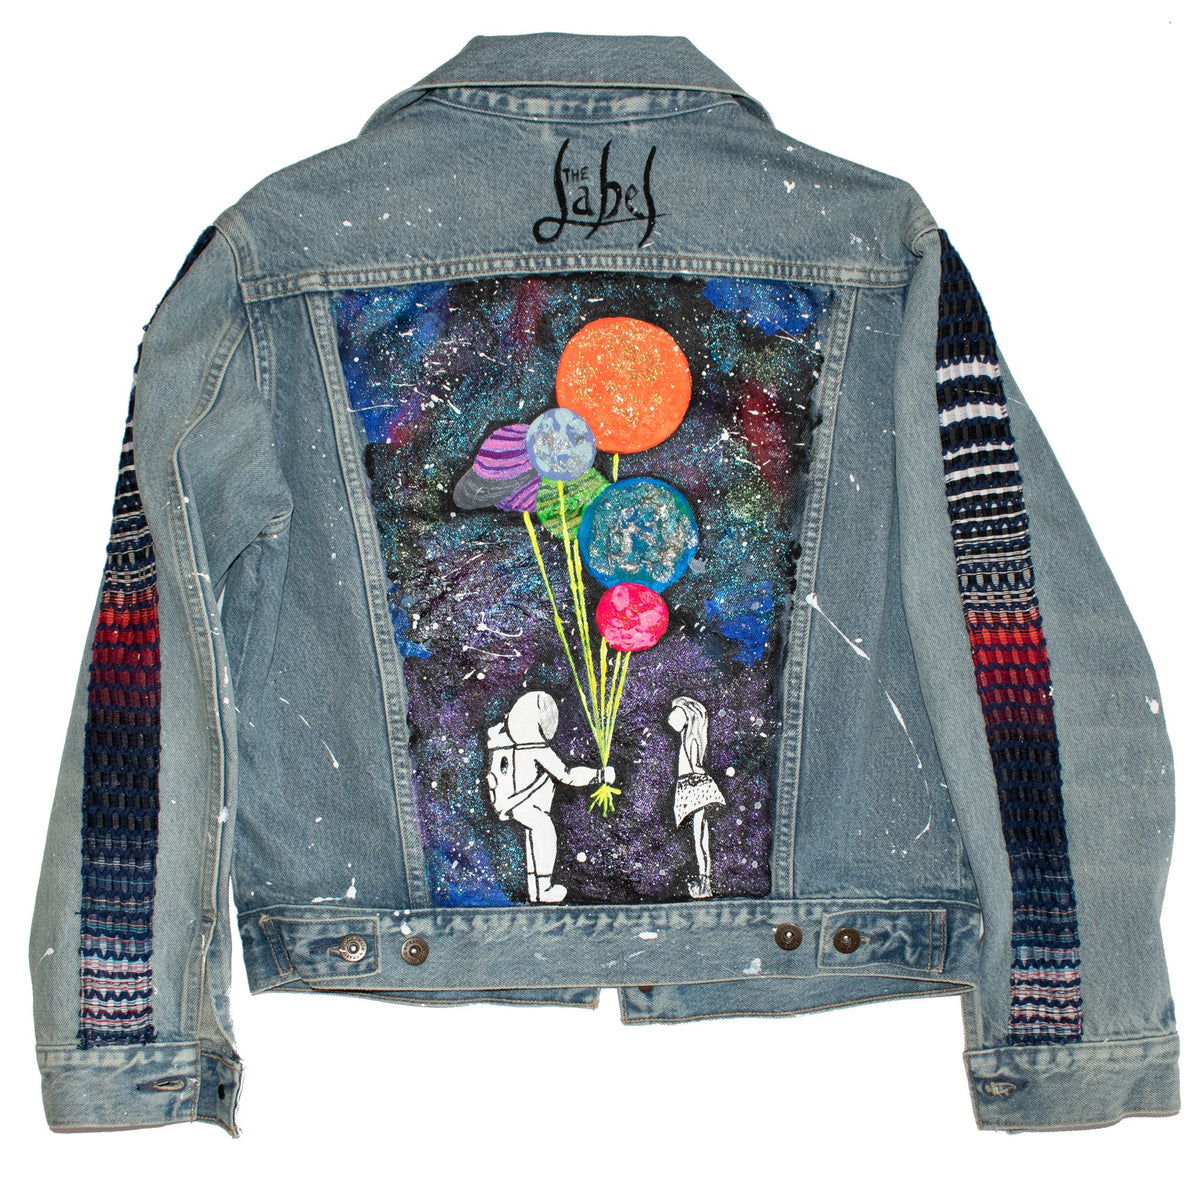 I'll Give You All The Planets Hand painted denim jacket – The Label ...